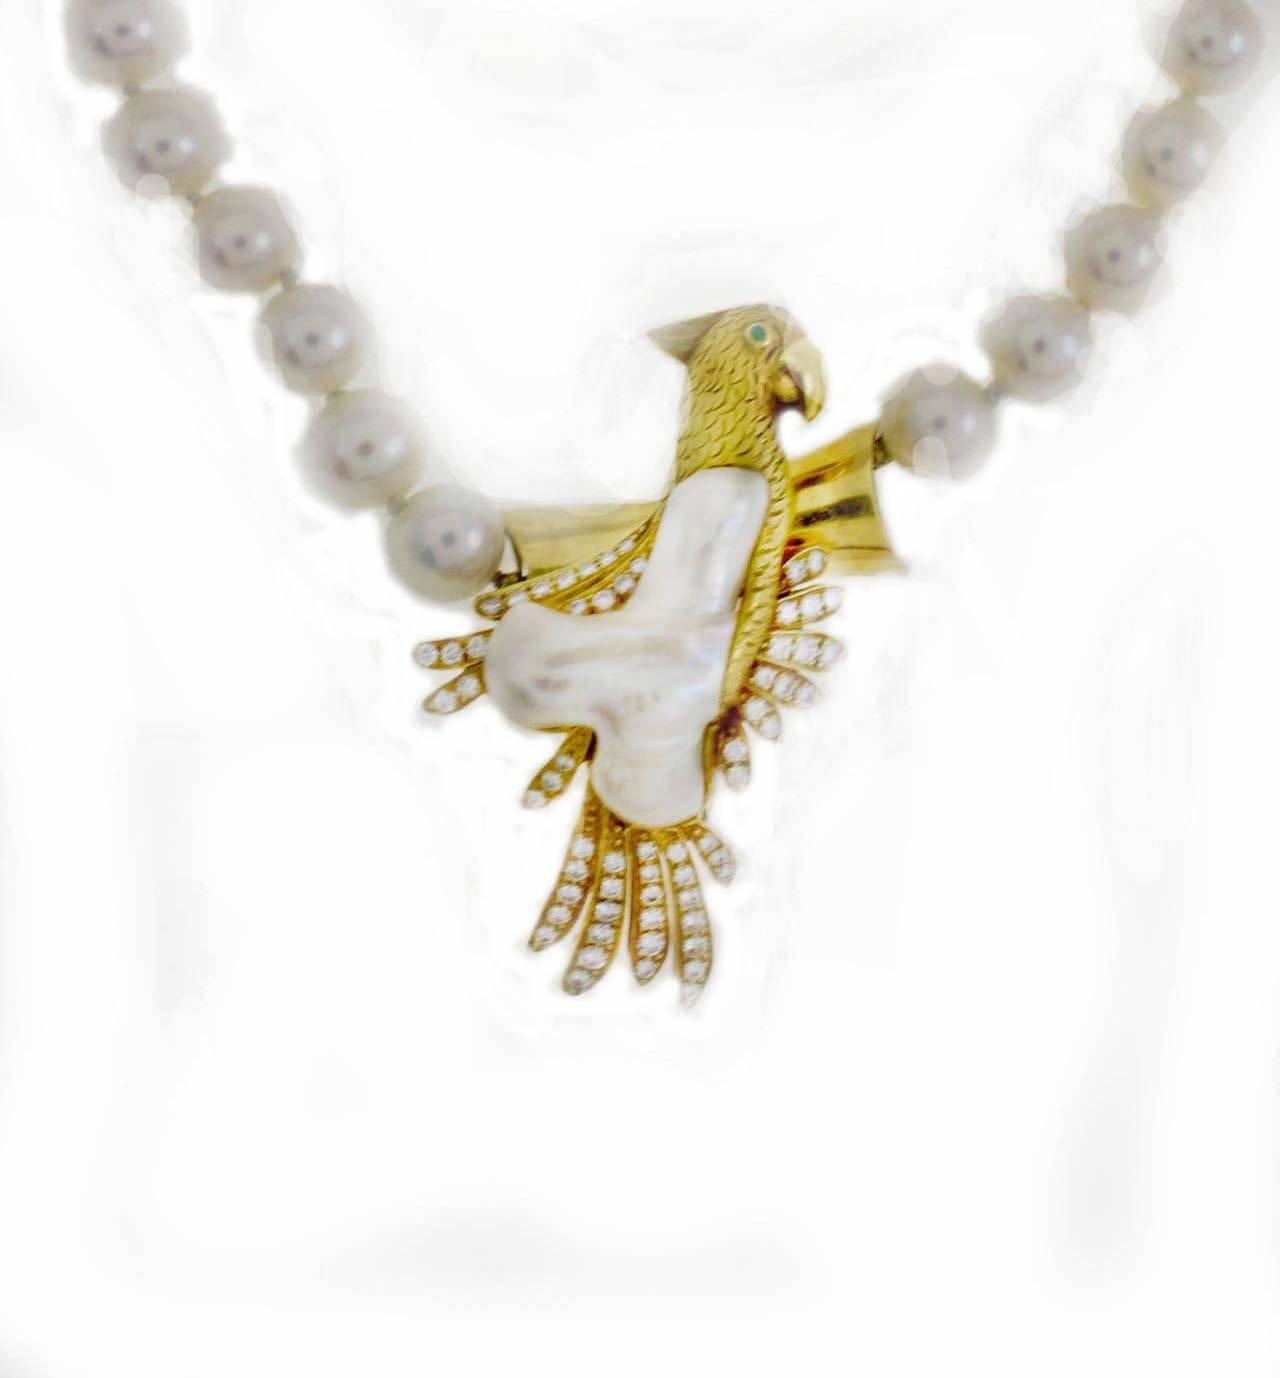 SHIPPING POLICY:
No additional costs will be added to this order.
Shipping costs will be totally covered by the seller (customs duties included).

Pearl necklace embellished with a parrot pendant/brooch in 18Kt gold composed of a chest of pearl and